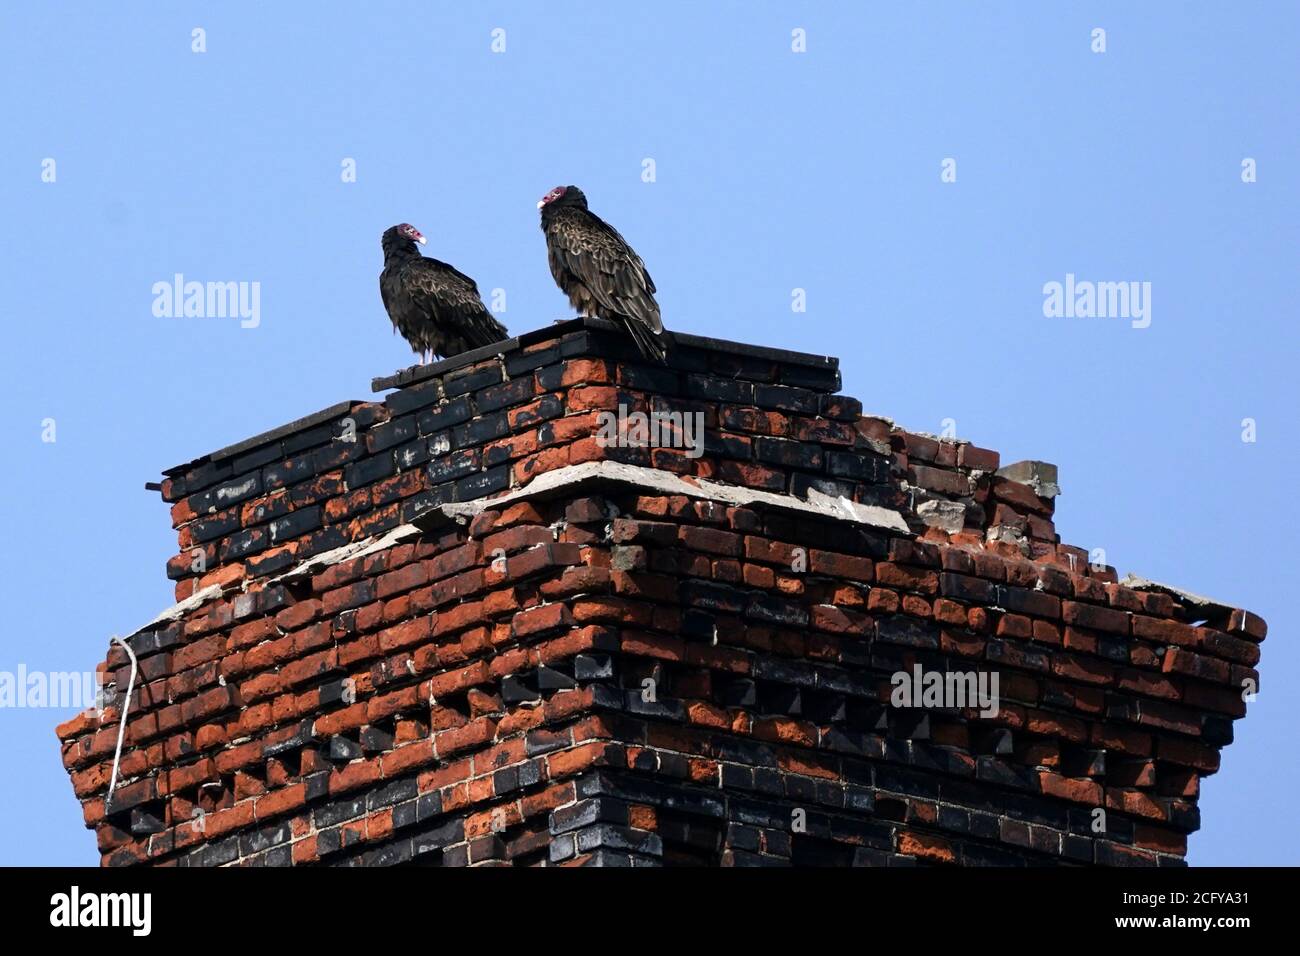 Two Turkey vultures on crumbling chimney Stock Photo